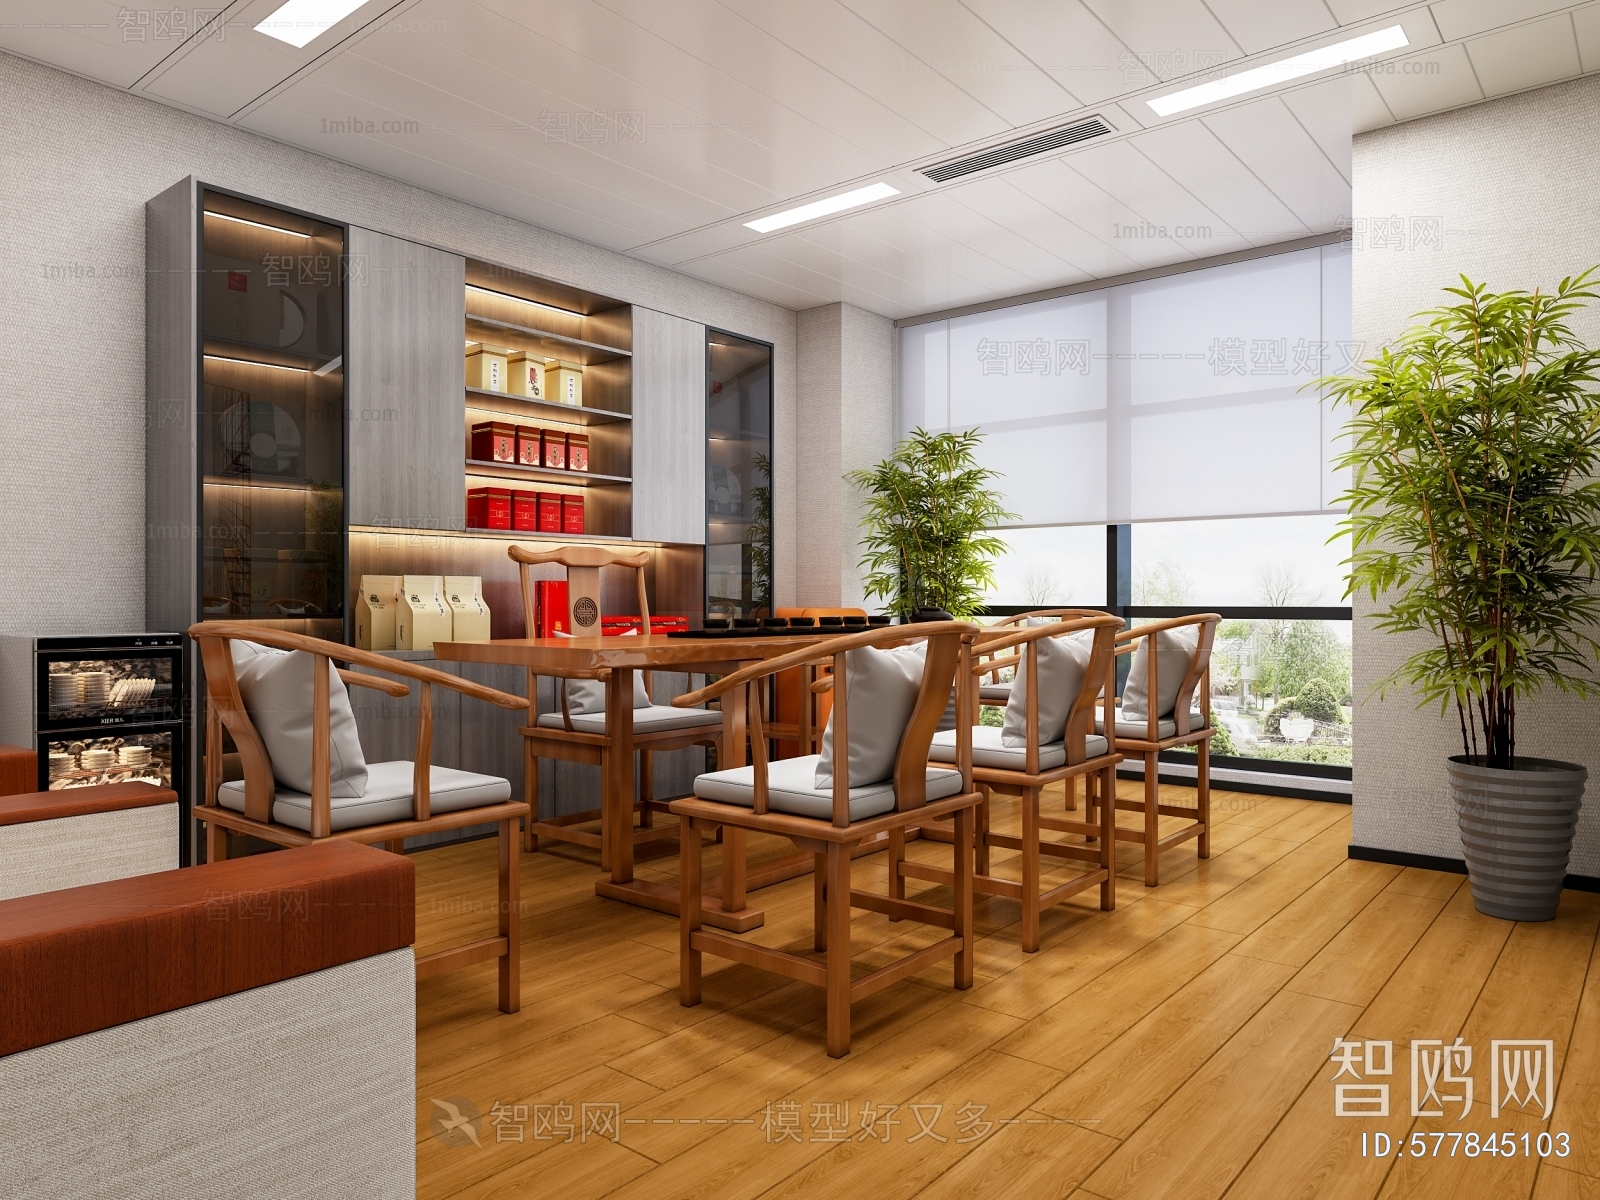 New Chinese Style Office Reception Area